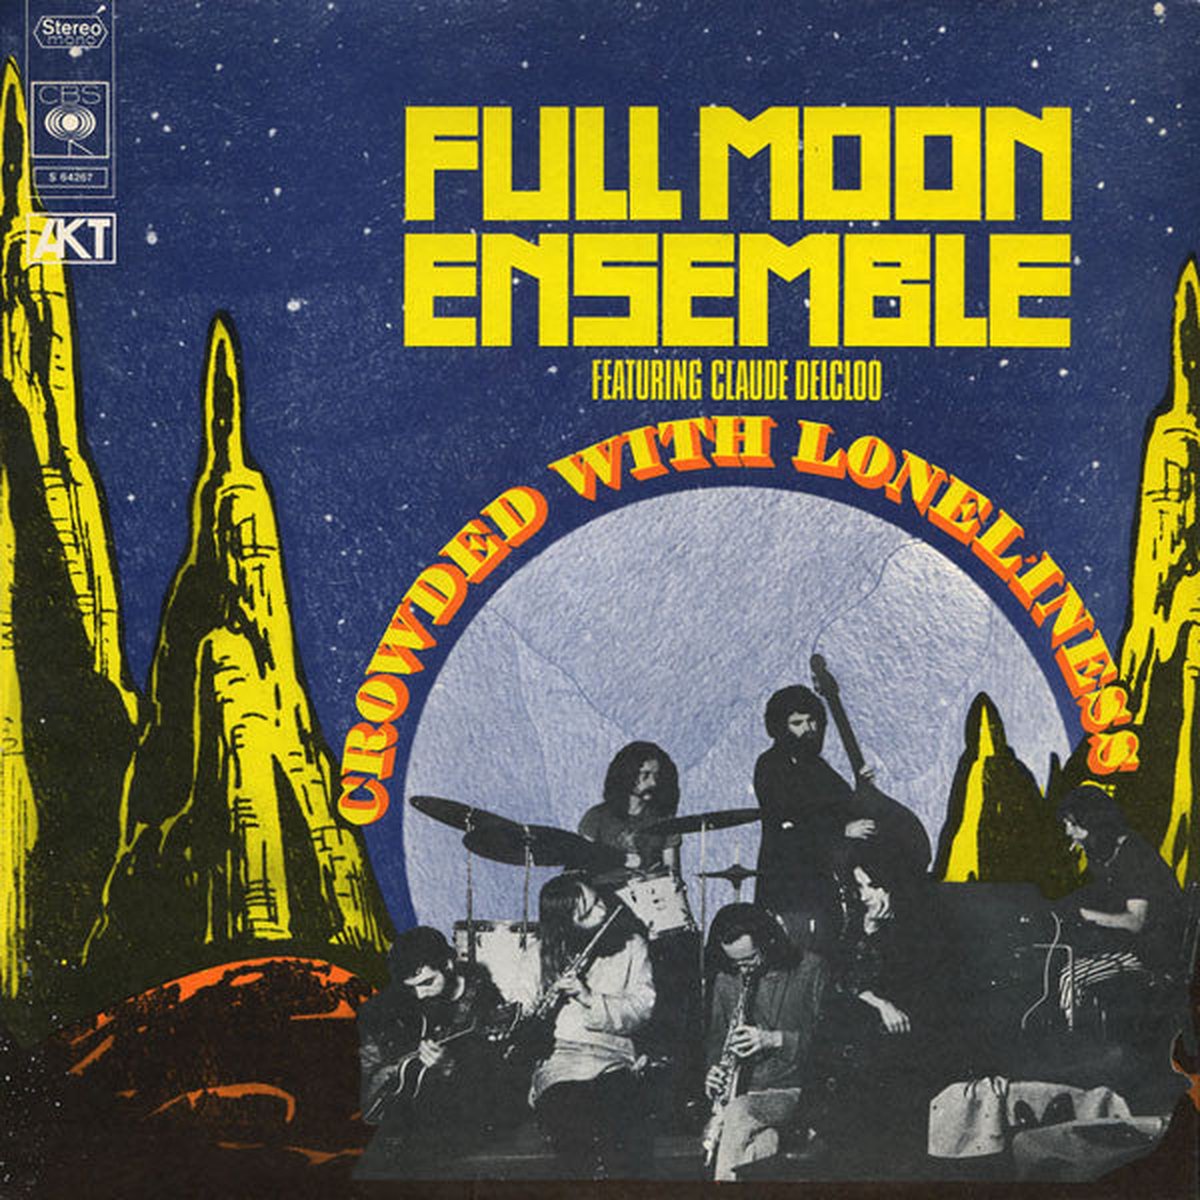 Full Moon Ensemble - Crowded With Loneliness (LP)